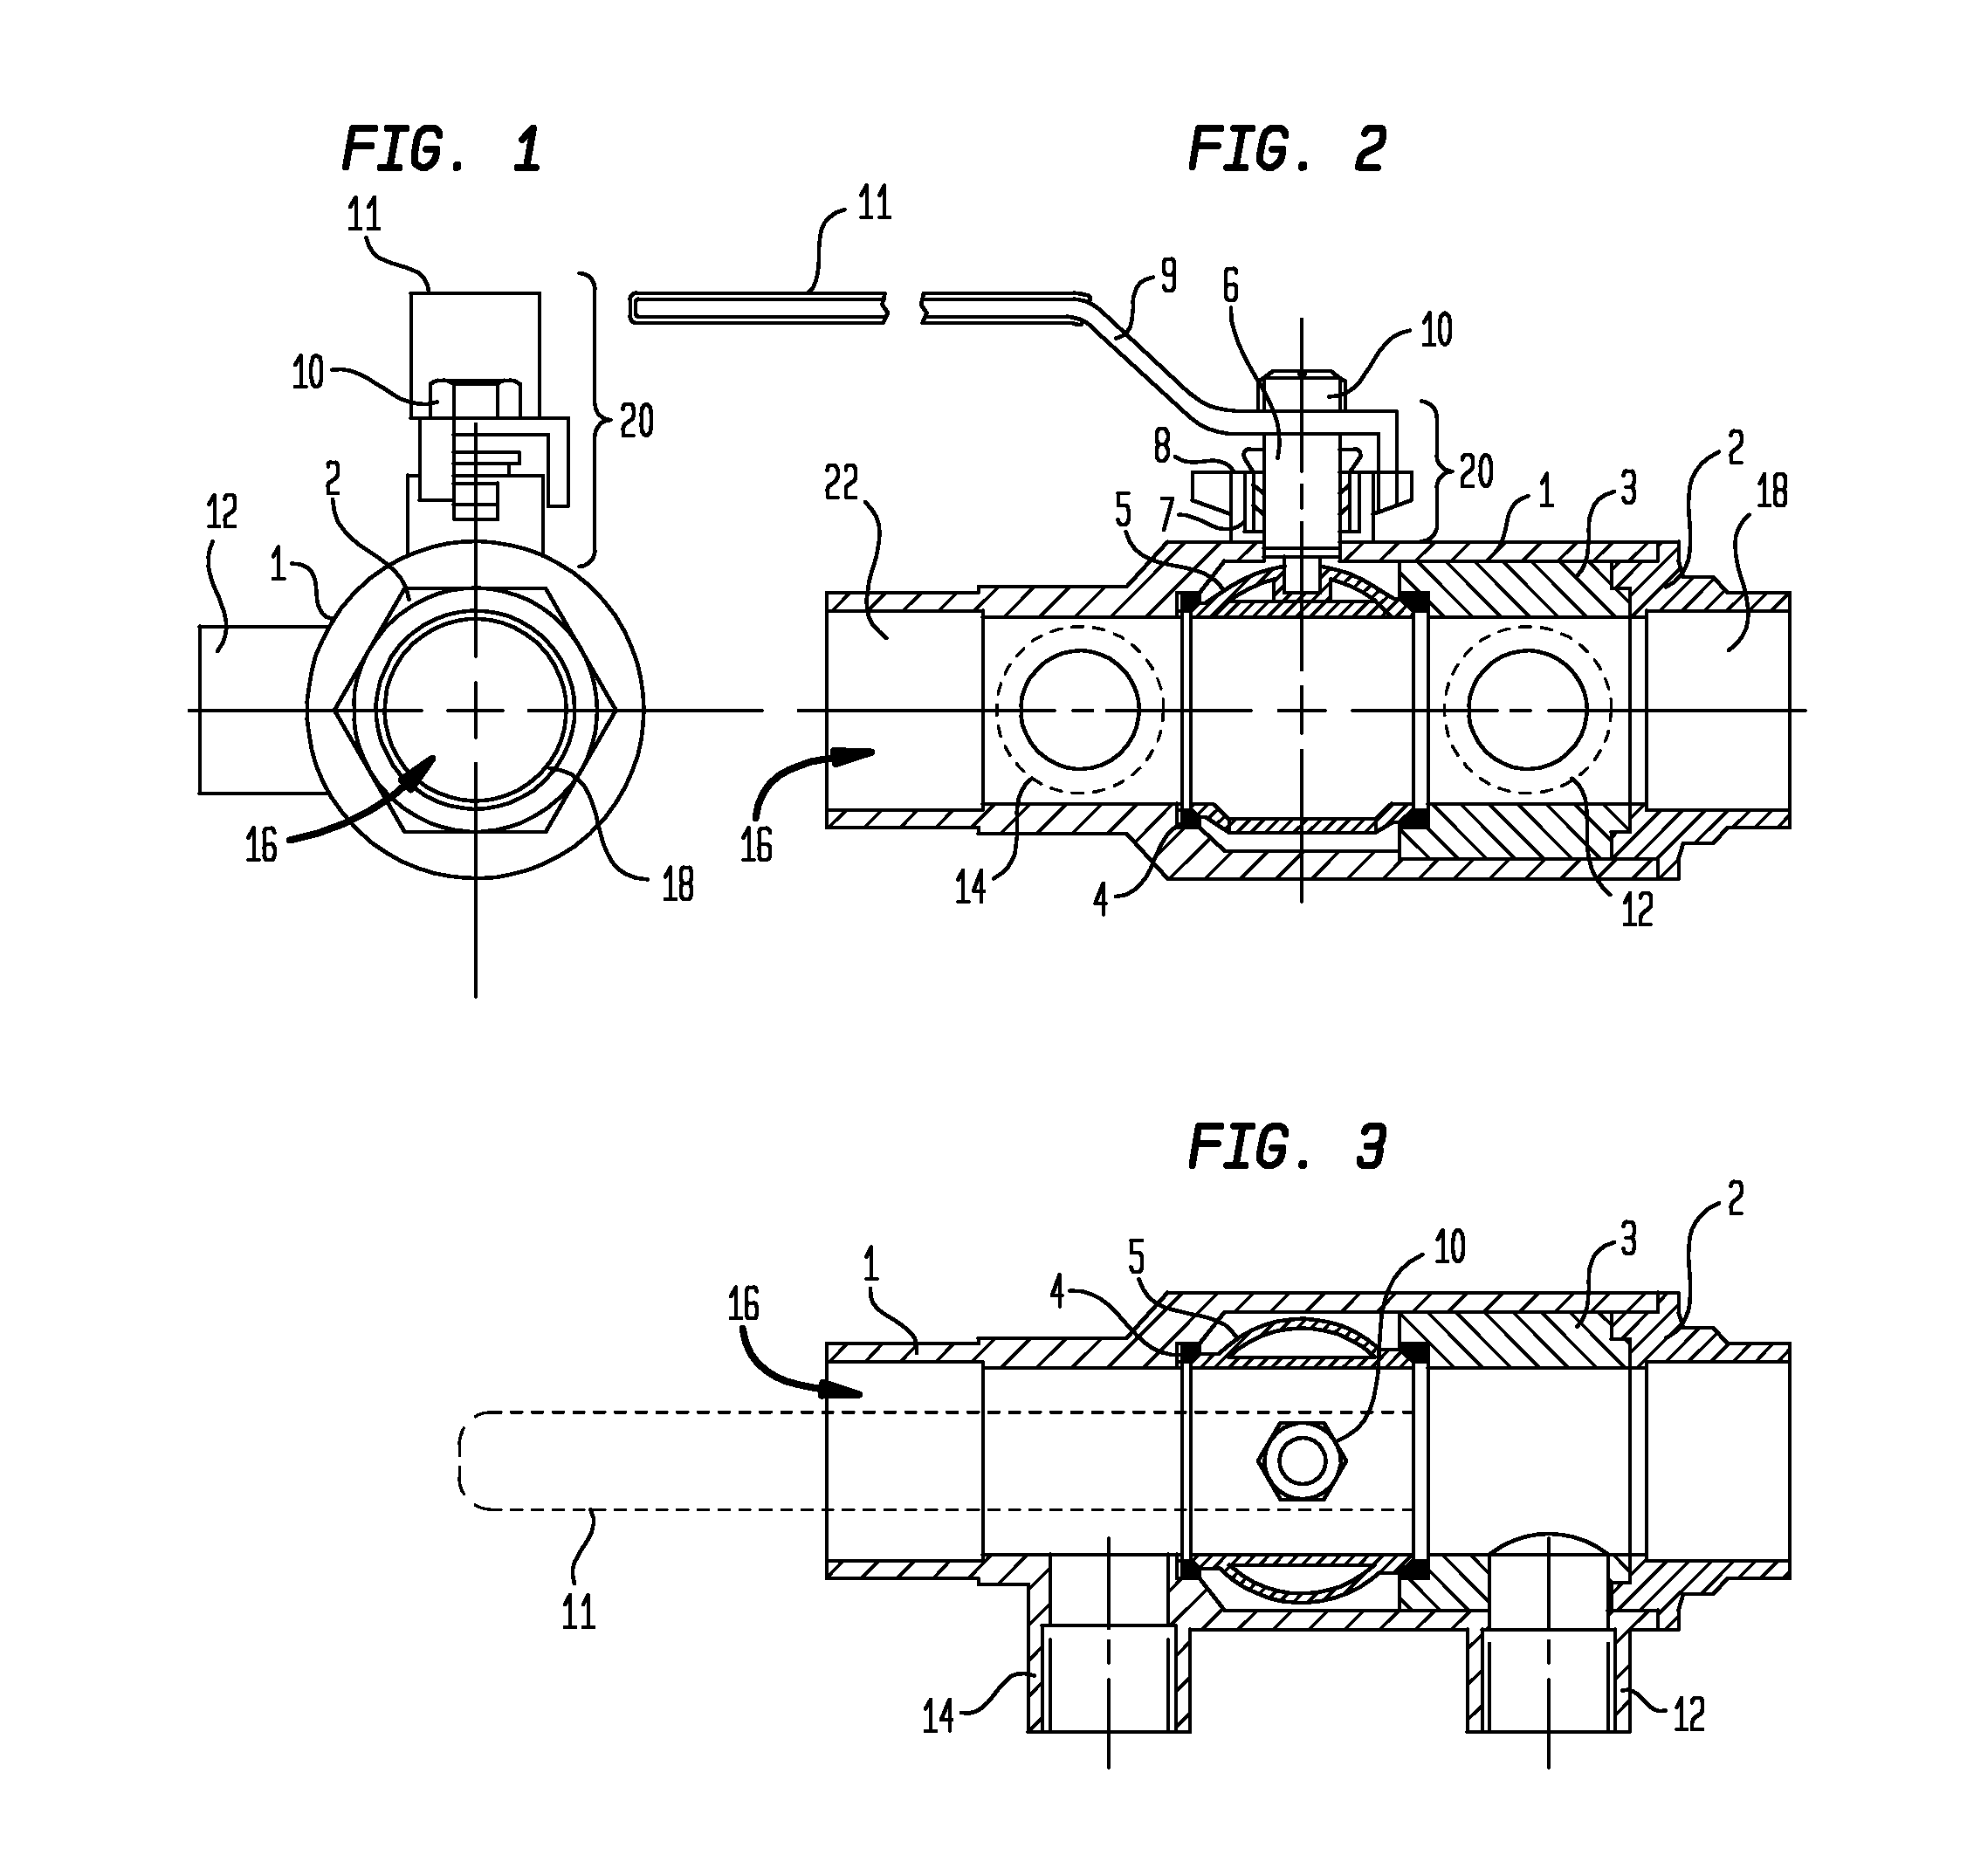 Purge/fill valve with a main valve portion aligned with a tee